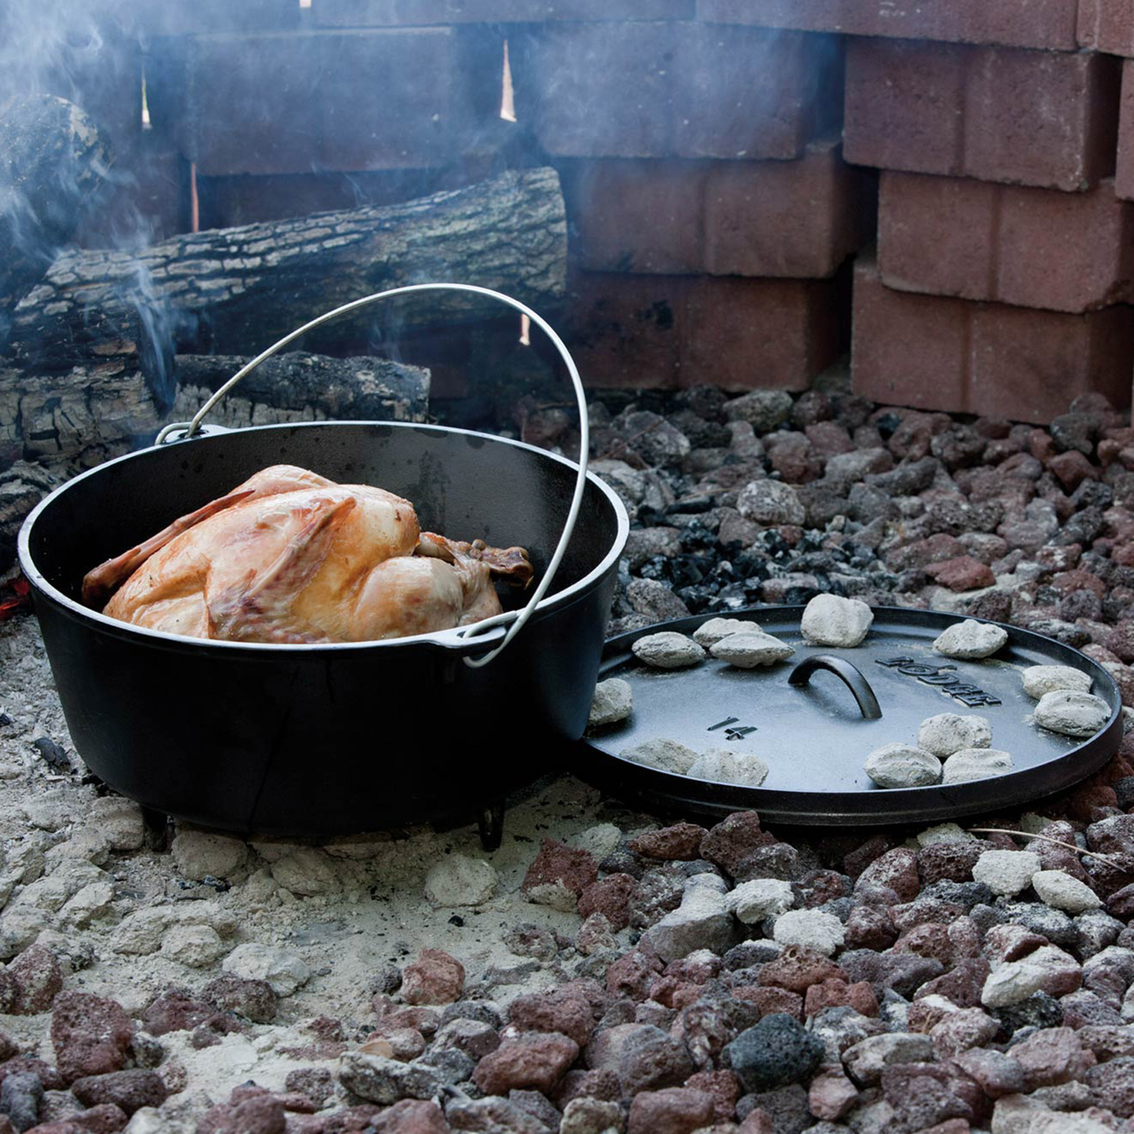 Lodge Cast Iron 14 in. Camp Dutch Oven - Image 2 of 2